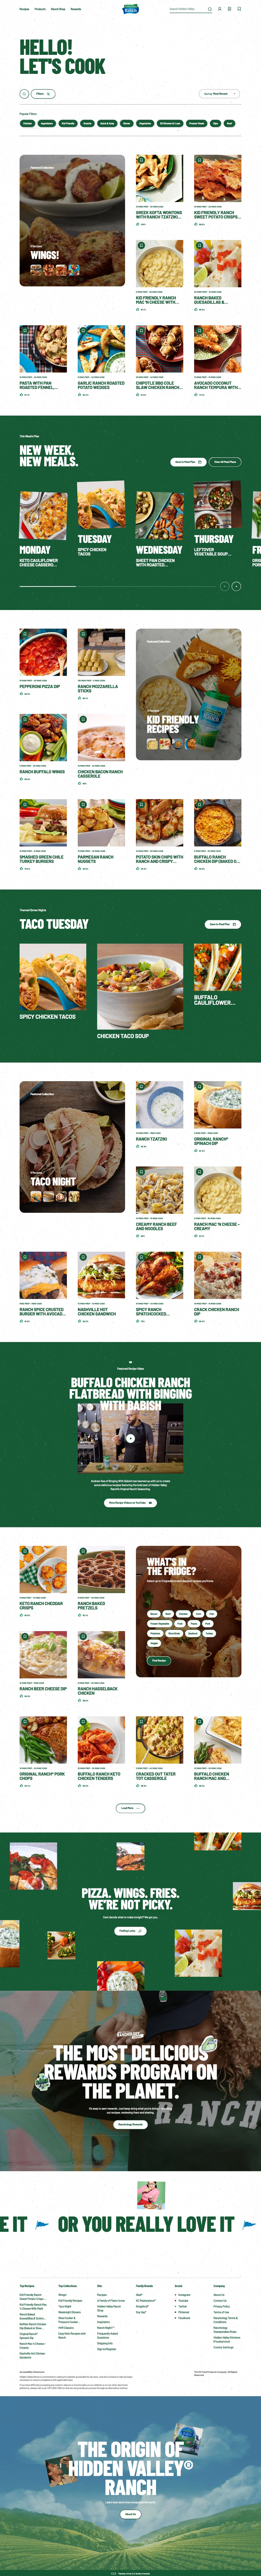 Hidden Valley Landing Page Example: Check out our recipes, products and, rewards for the full Hidden Valley Ranch experience. We have all the content you need to fulfill your love for ranch!